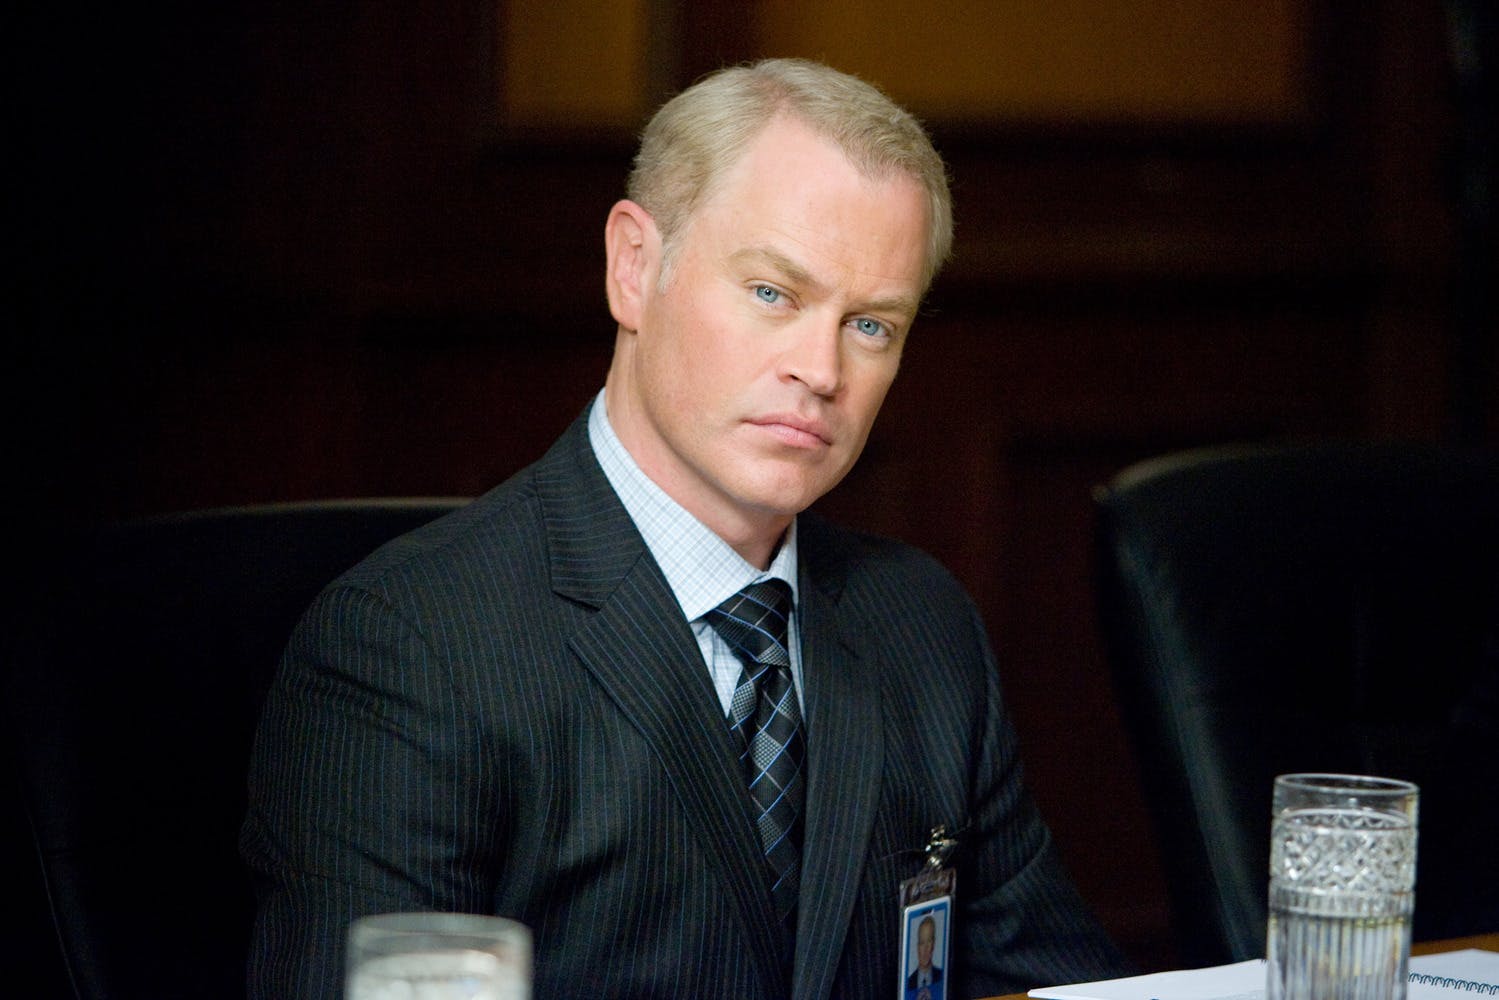 Neal McDonough. Neal McDonough returned to TV on Desperate Housewives back in 2008, where he played Edie Britt’s husband before he was killed off the show the following year.

Neal then went on to star in ABC TV show Scoundrels, but he wasn’t part of the cast for very long since he was later fired from the show for refusing to film any of the love scenes. Neal is a married man with three children and he thought that taking part in such scenes would clash with who he is.